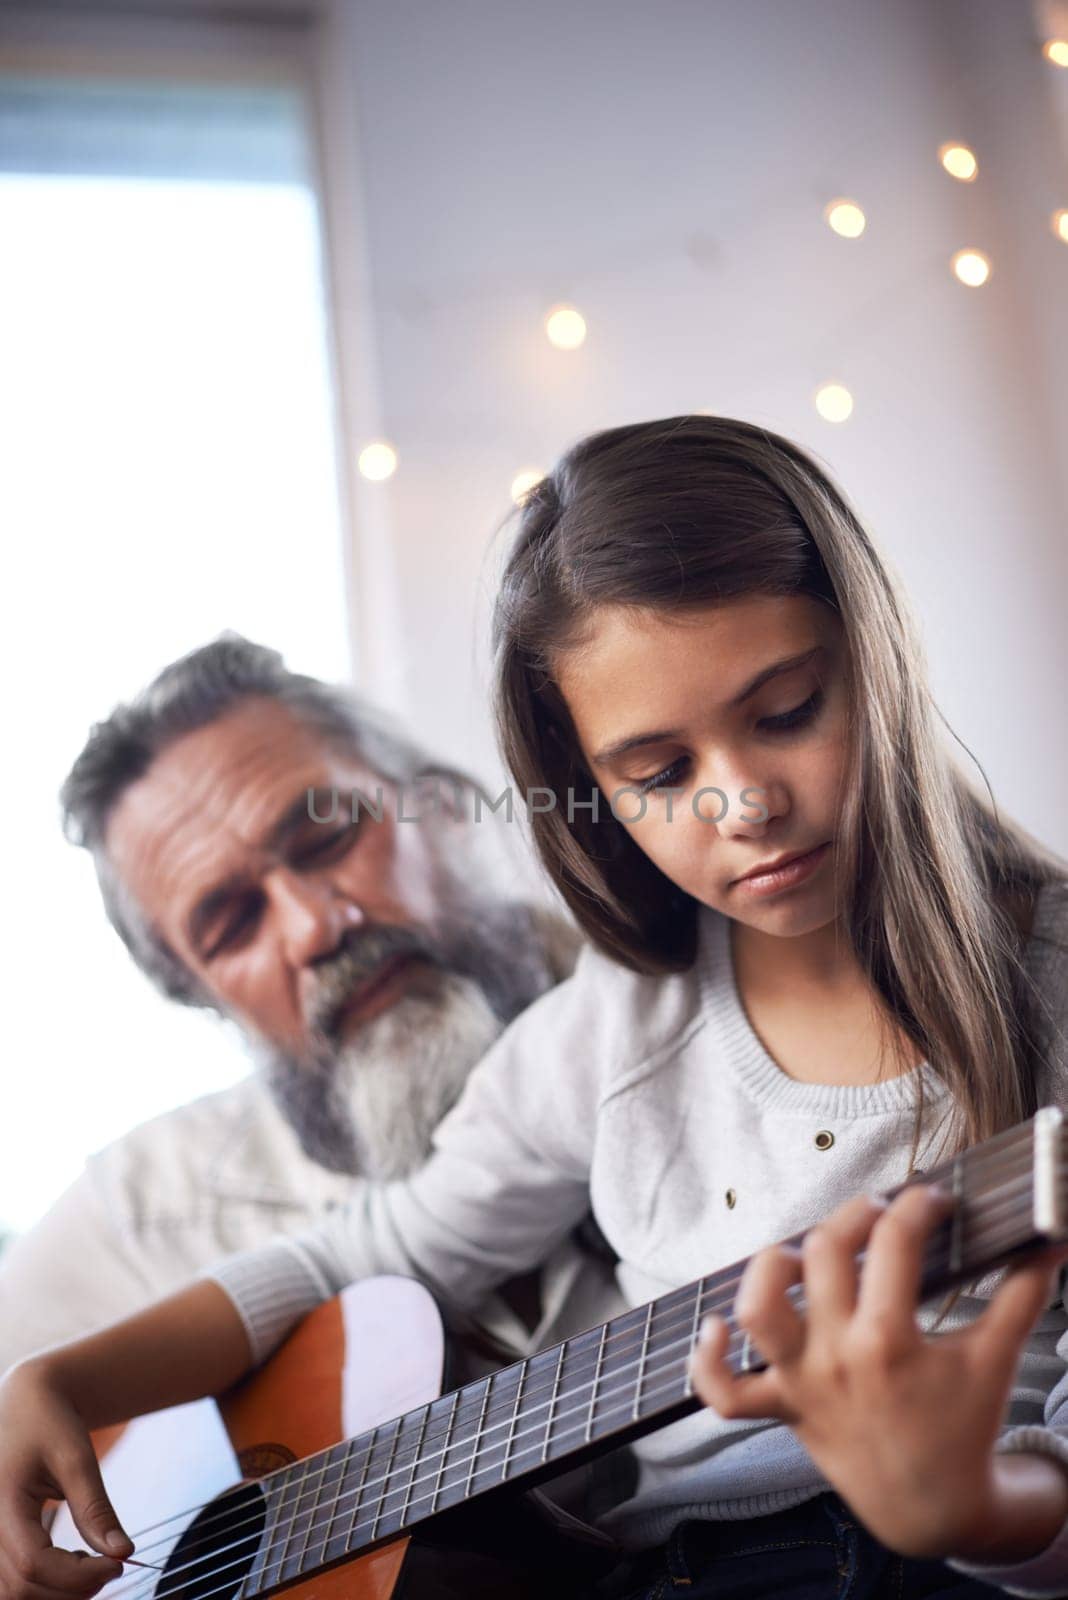 Girl with grandfather, guitar and learning to play, music education and help with creative development. Musician, art and old man helping female kid learn focus and skill on musical instrument.